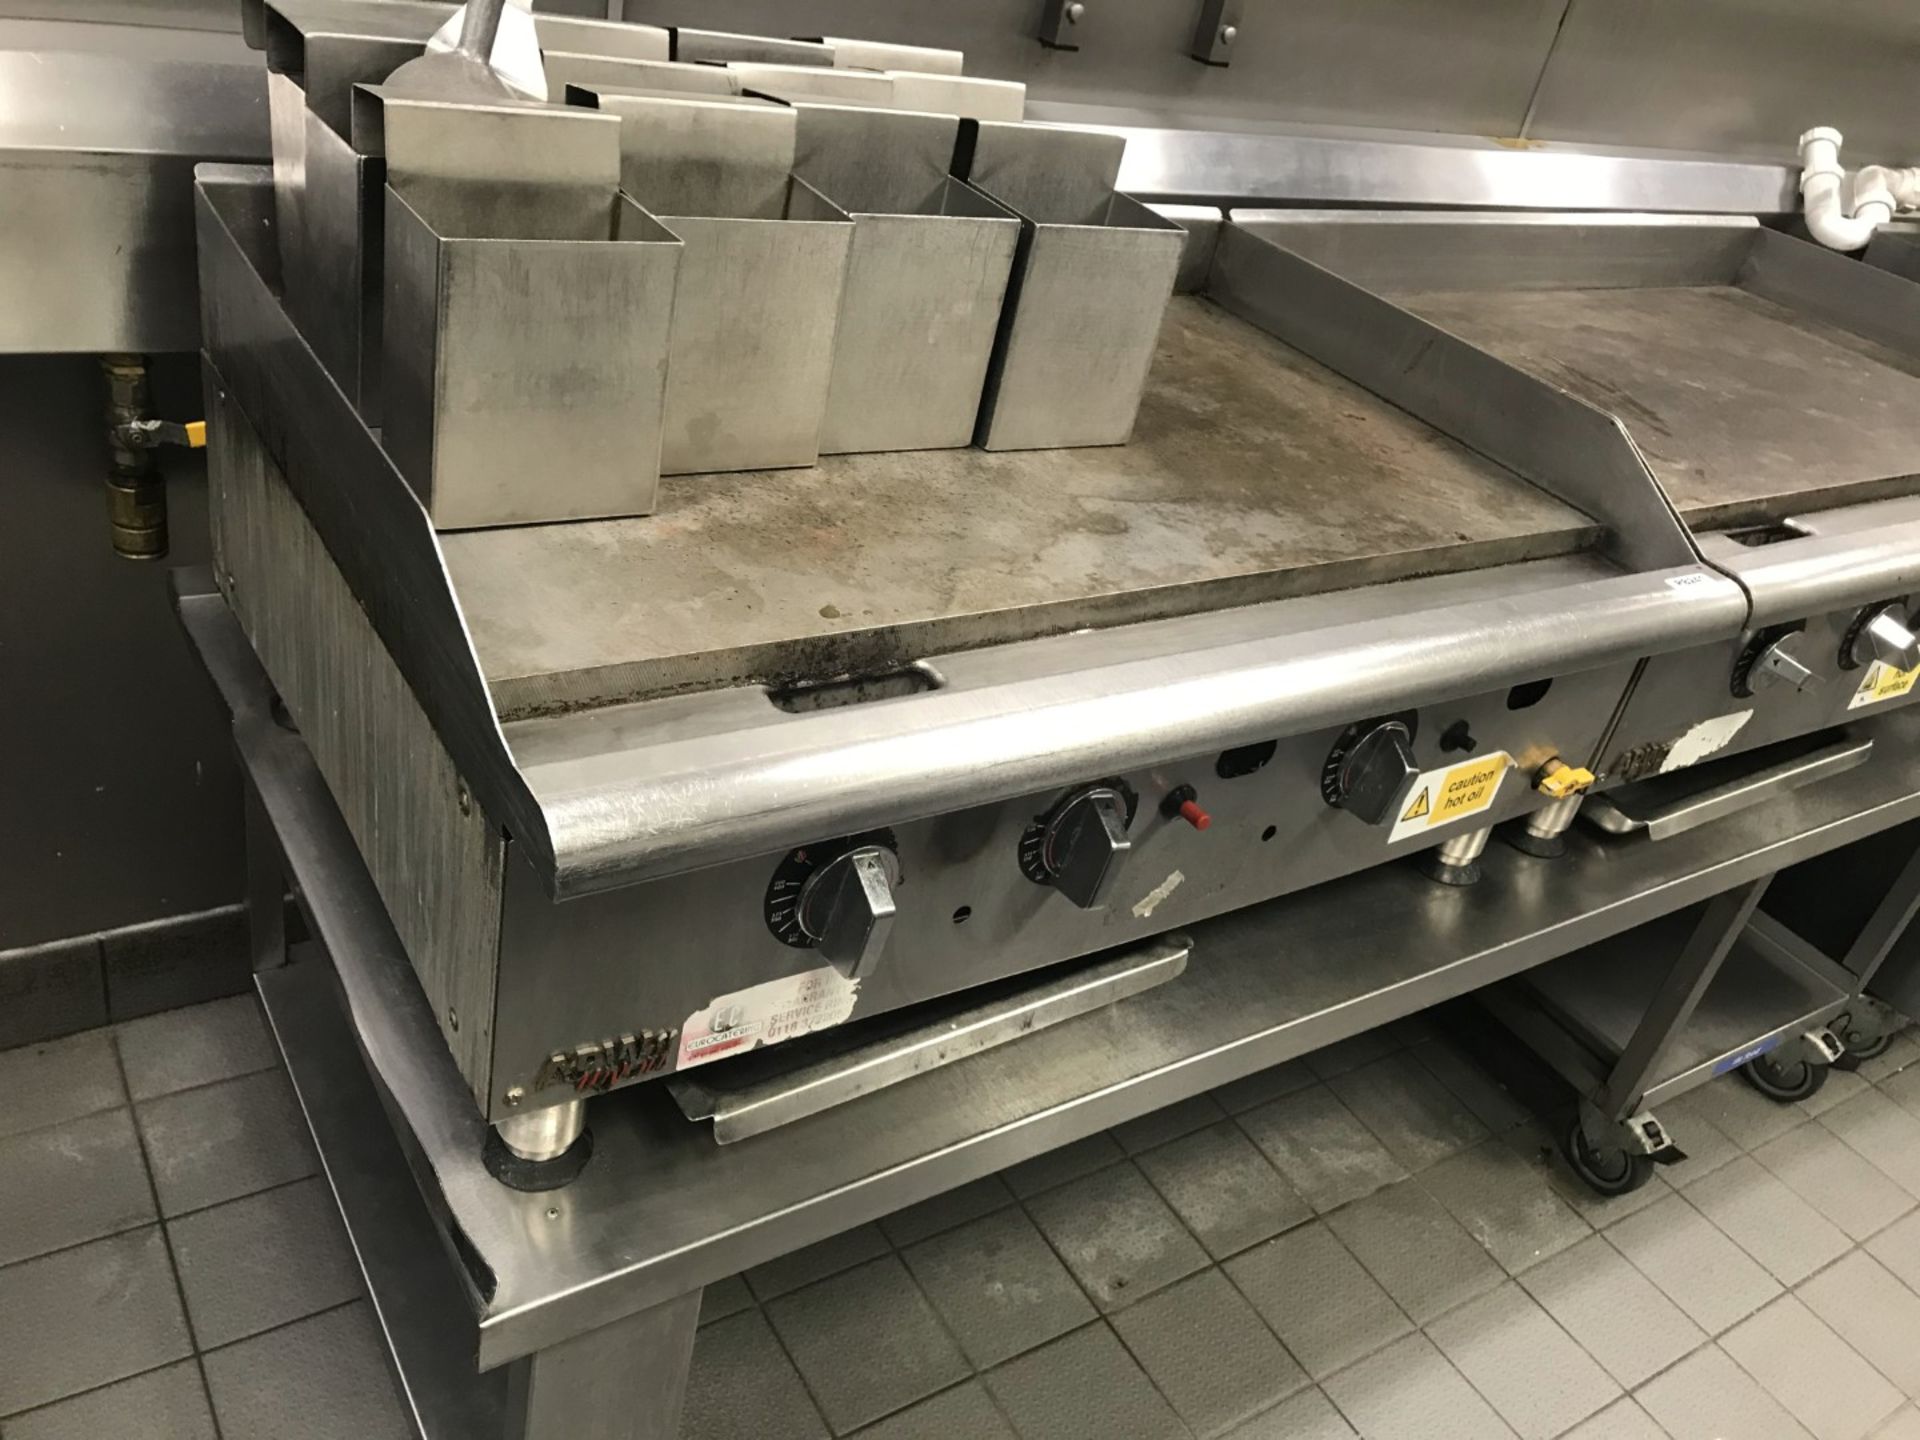 2 x APW Wyott Heavy Duty Countertop Griddles With Stand on Castors - Each Griddle Size W92 x D65 cms - Image 2 of 11